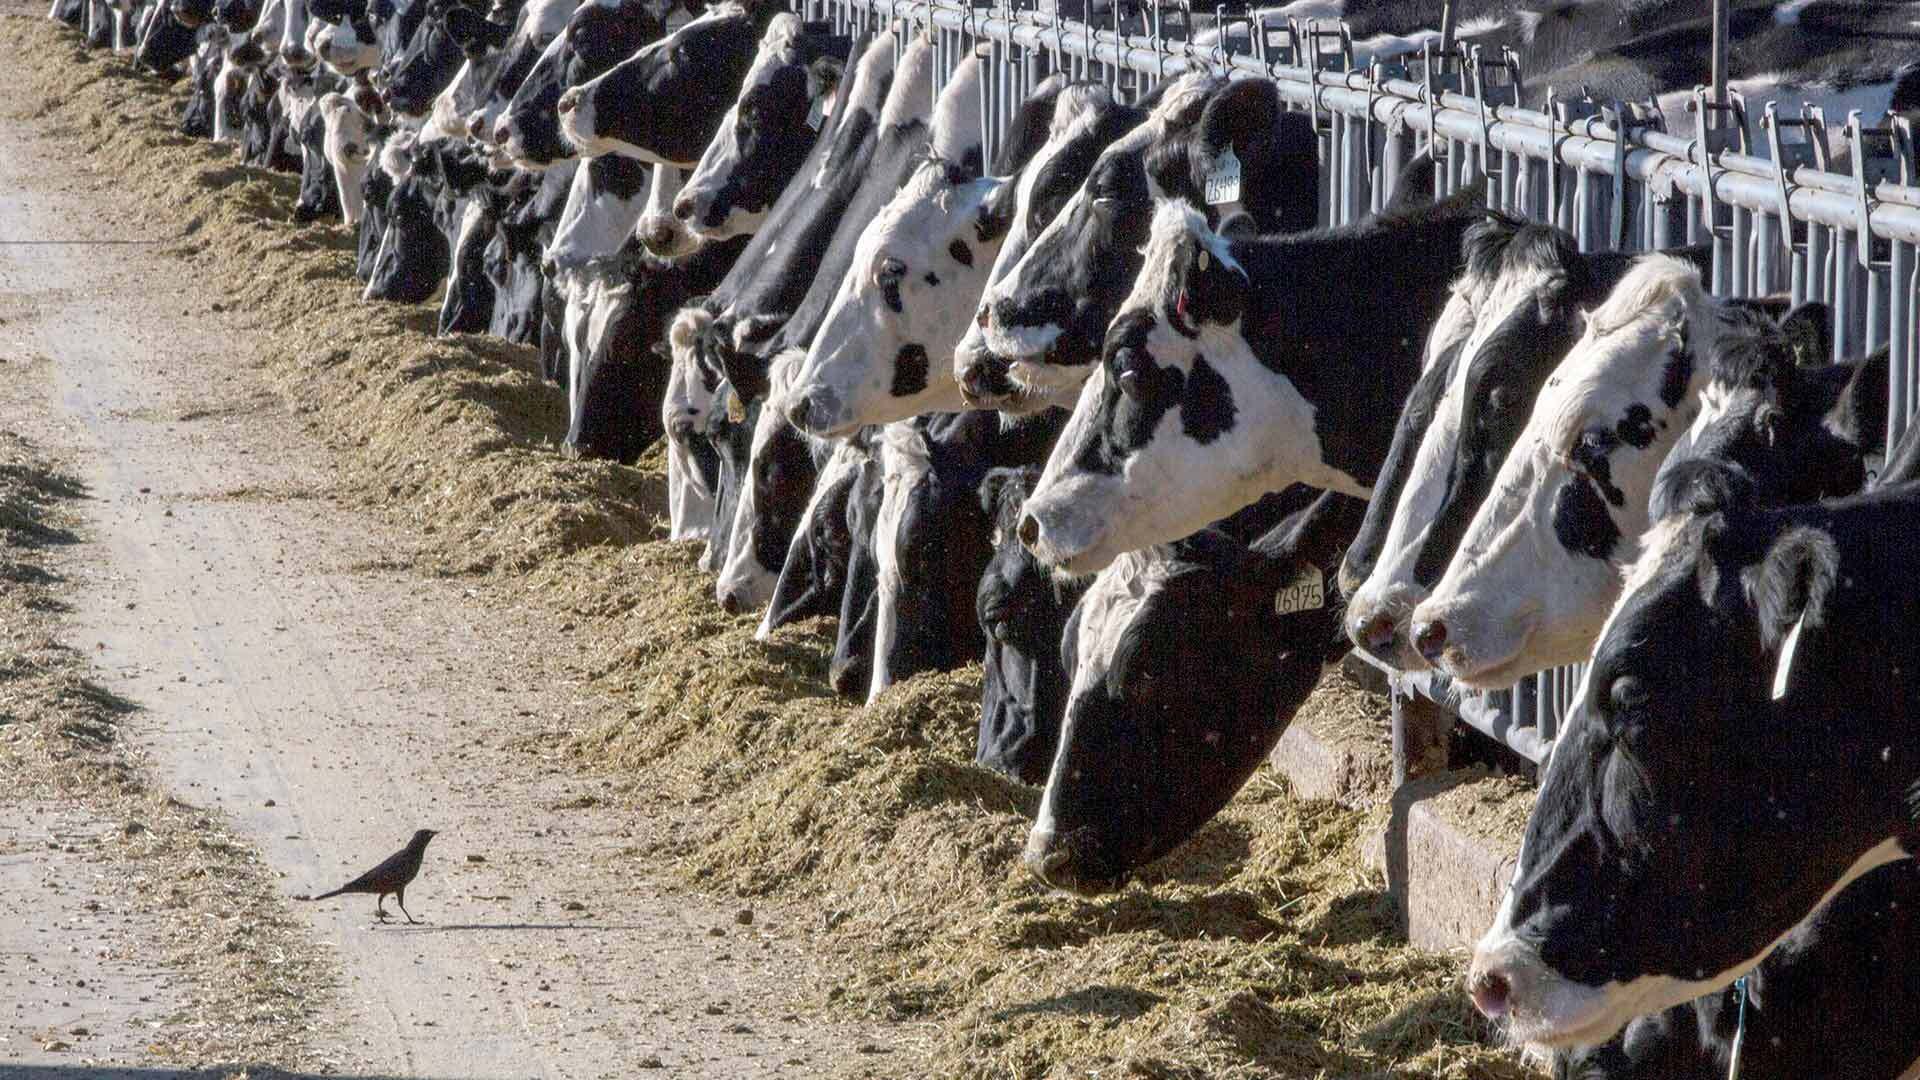 bird stands in front of cows on a dairy farm